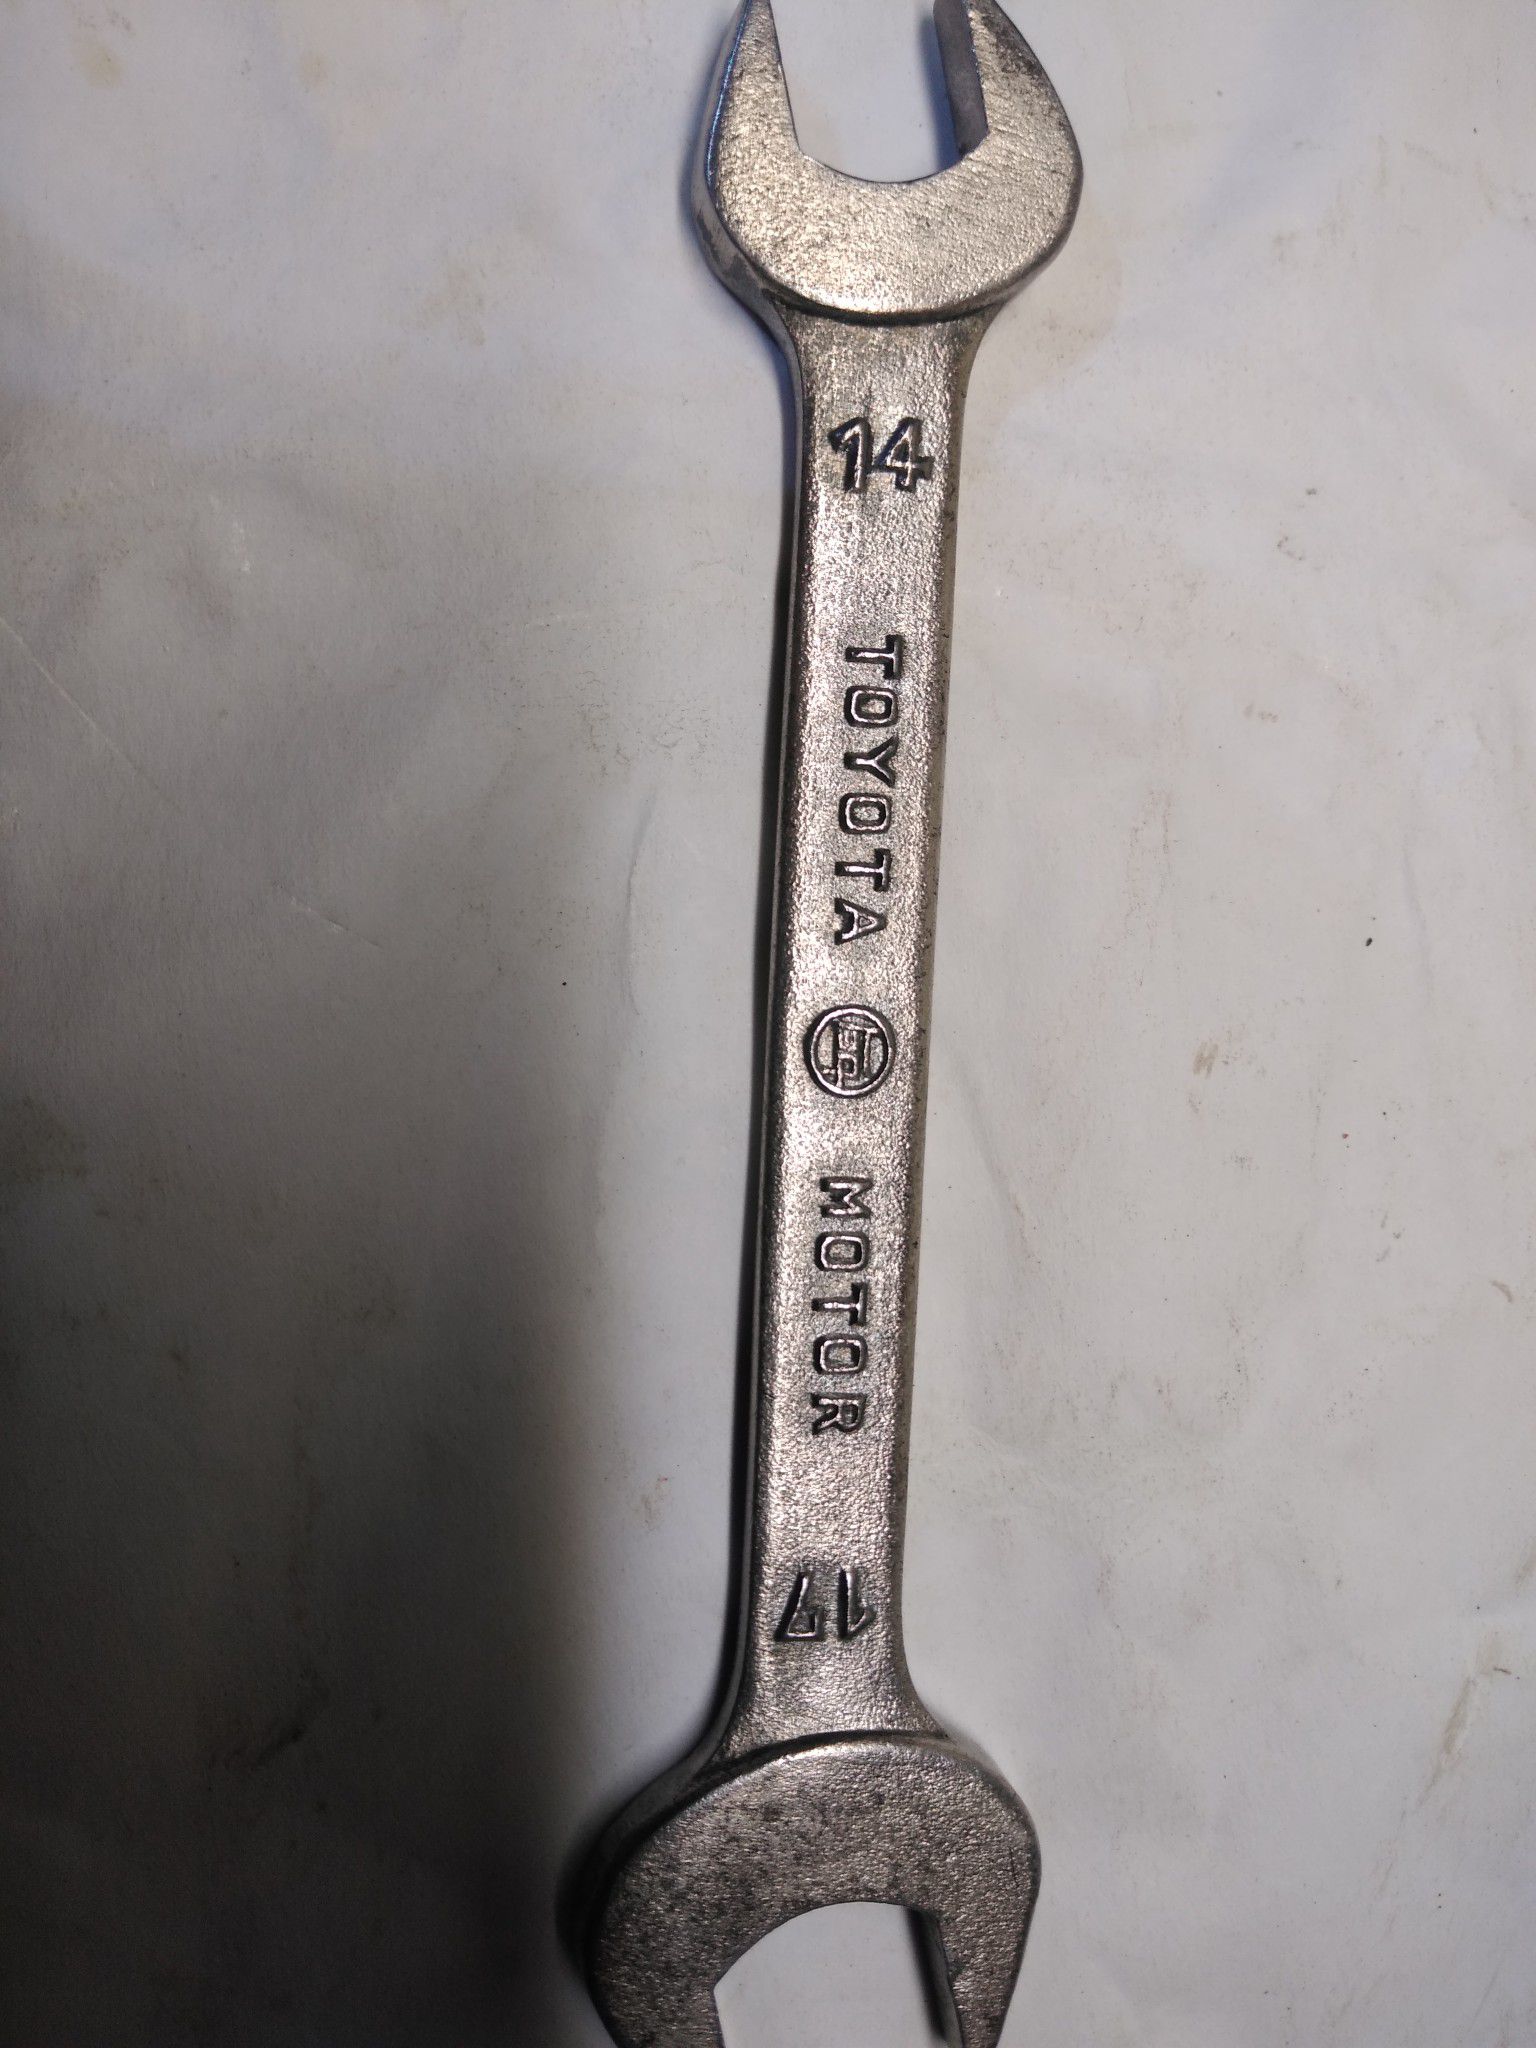 Toyota tool wrench